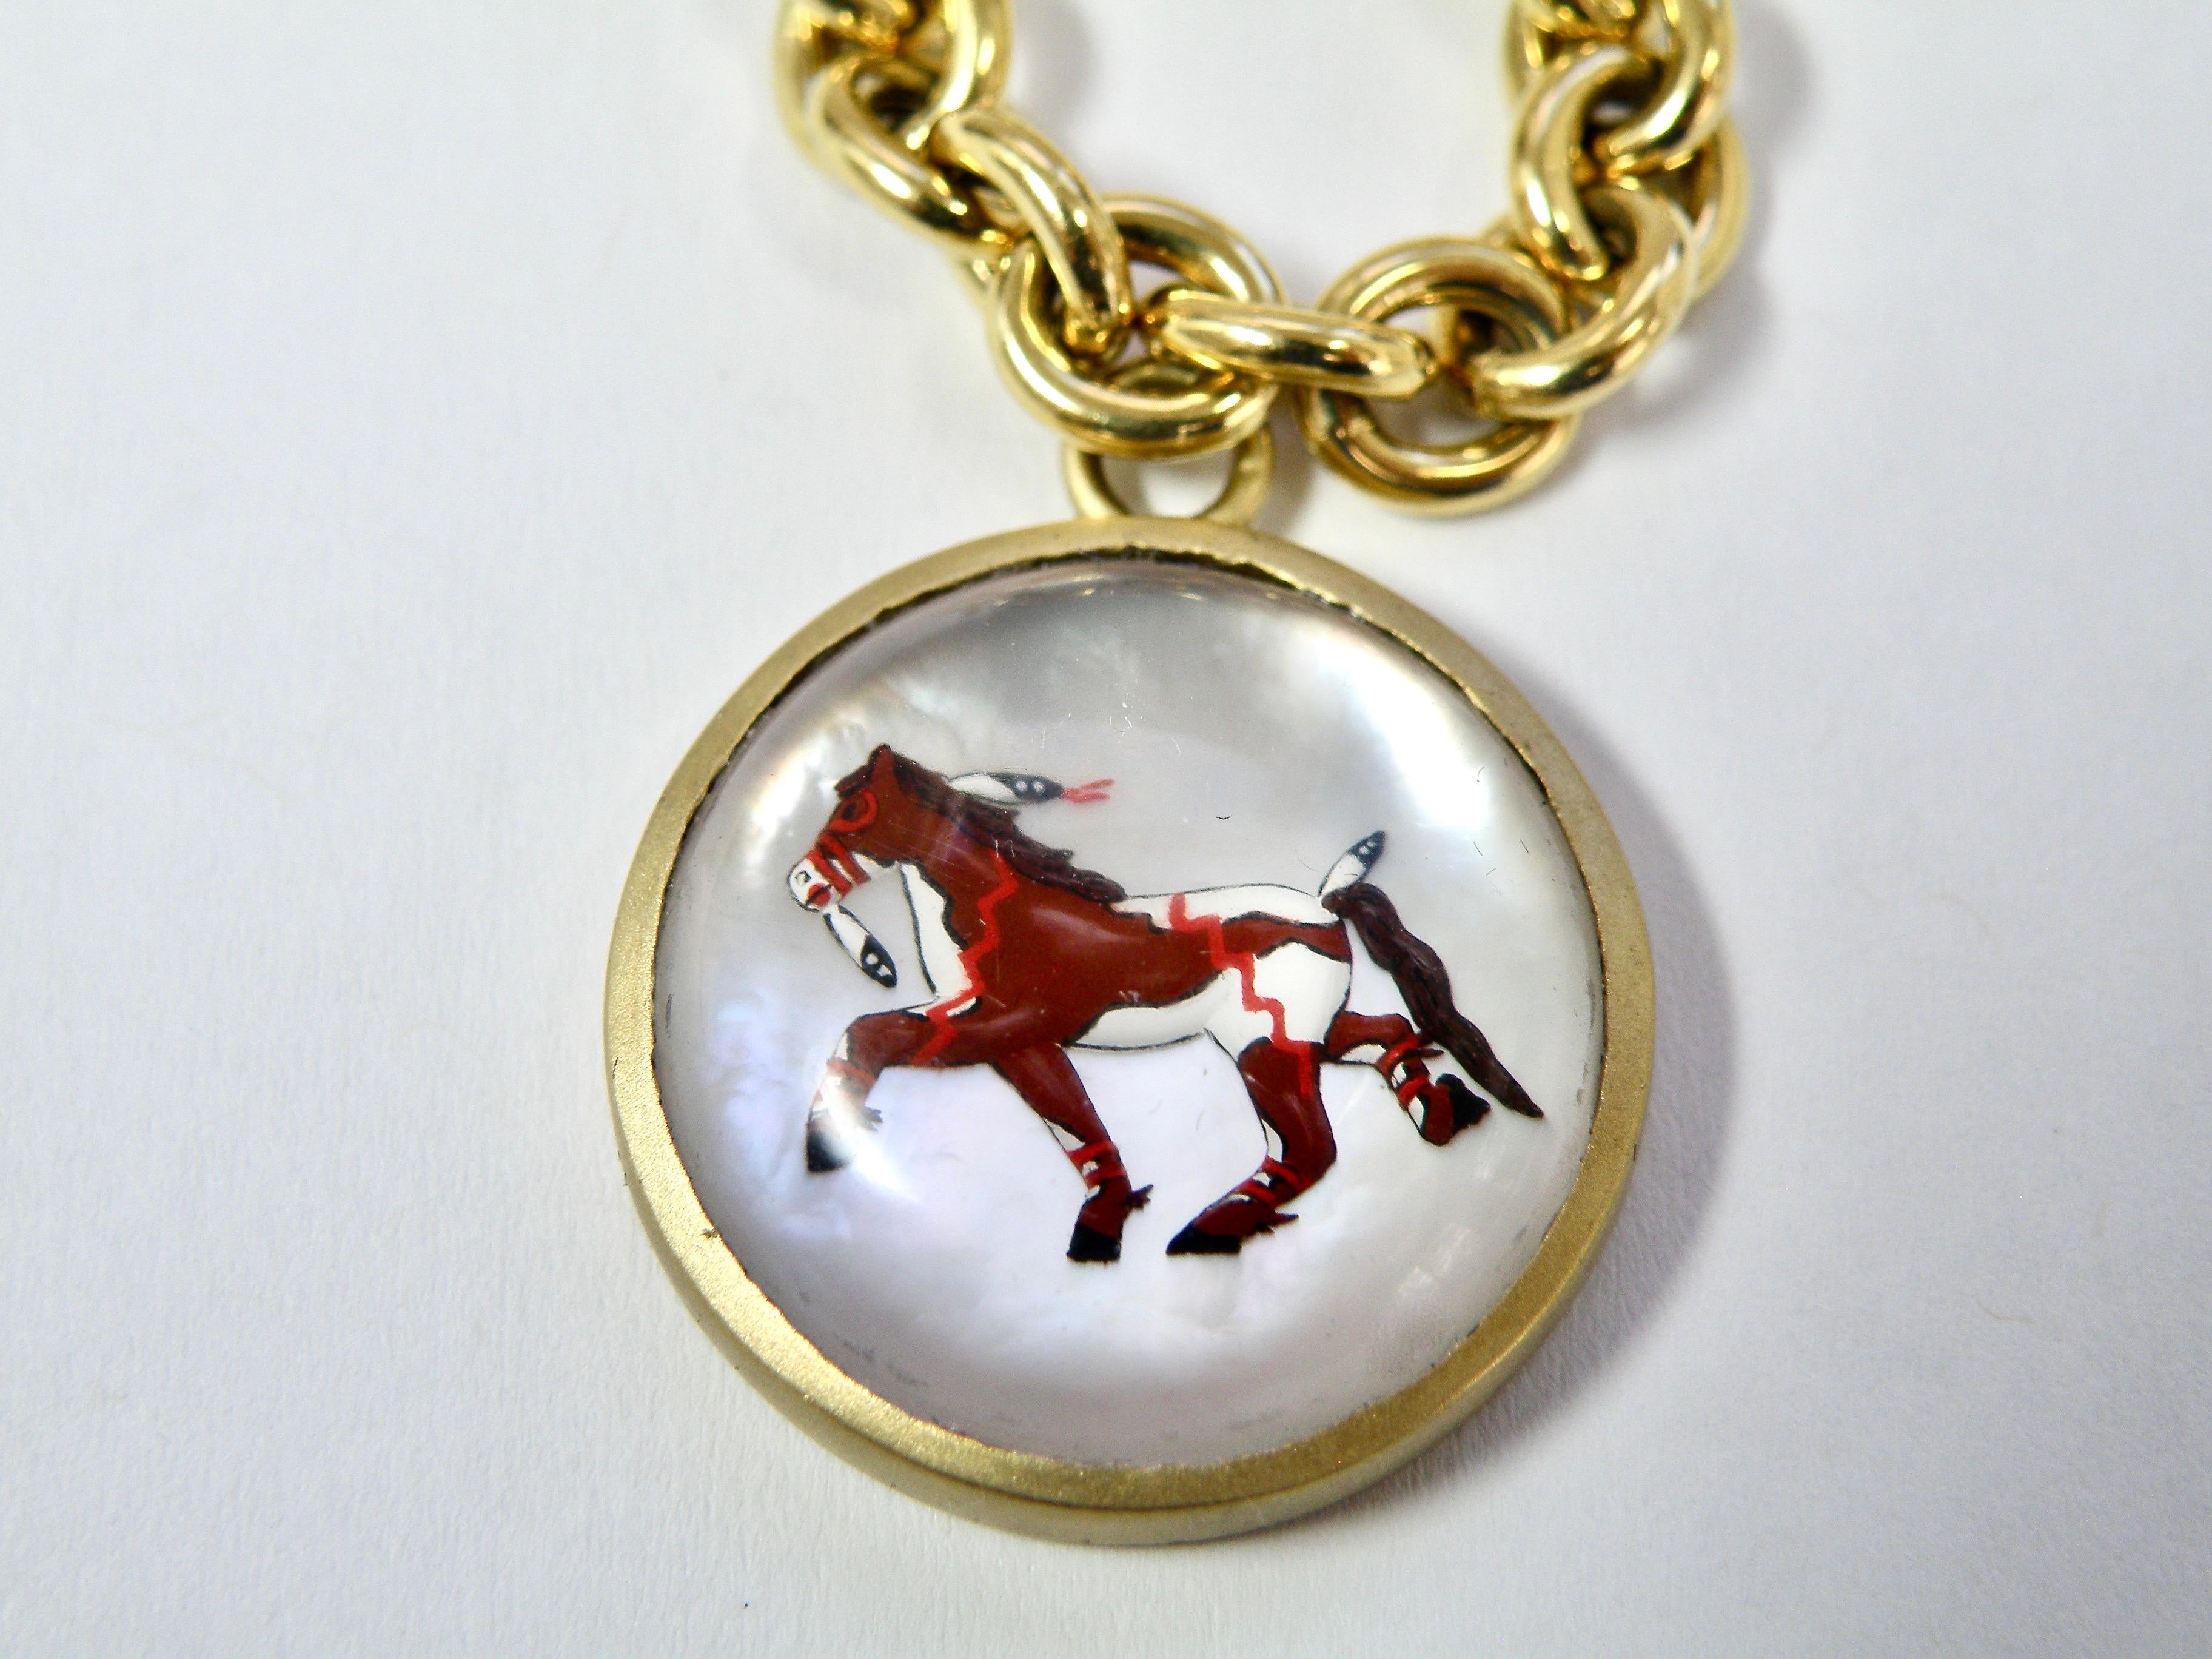 18K handcarved by mastter Idar Oberstein carver reverse crystal native american war pony pendant 25mm chain not included